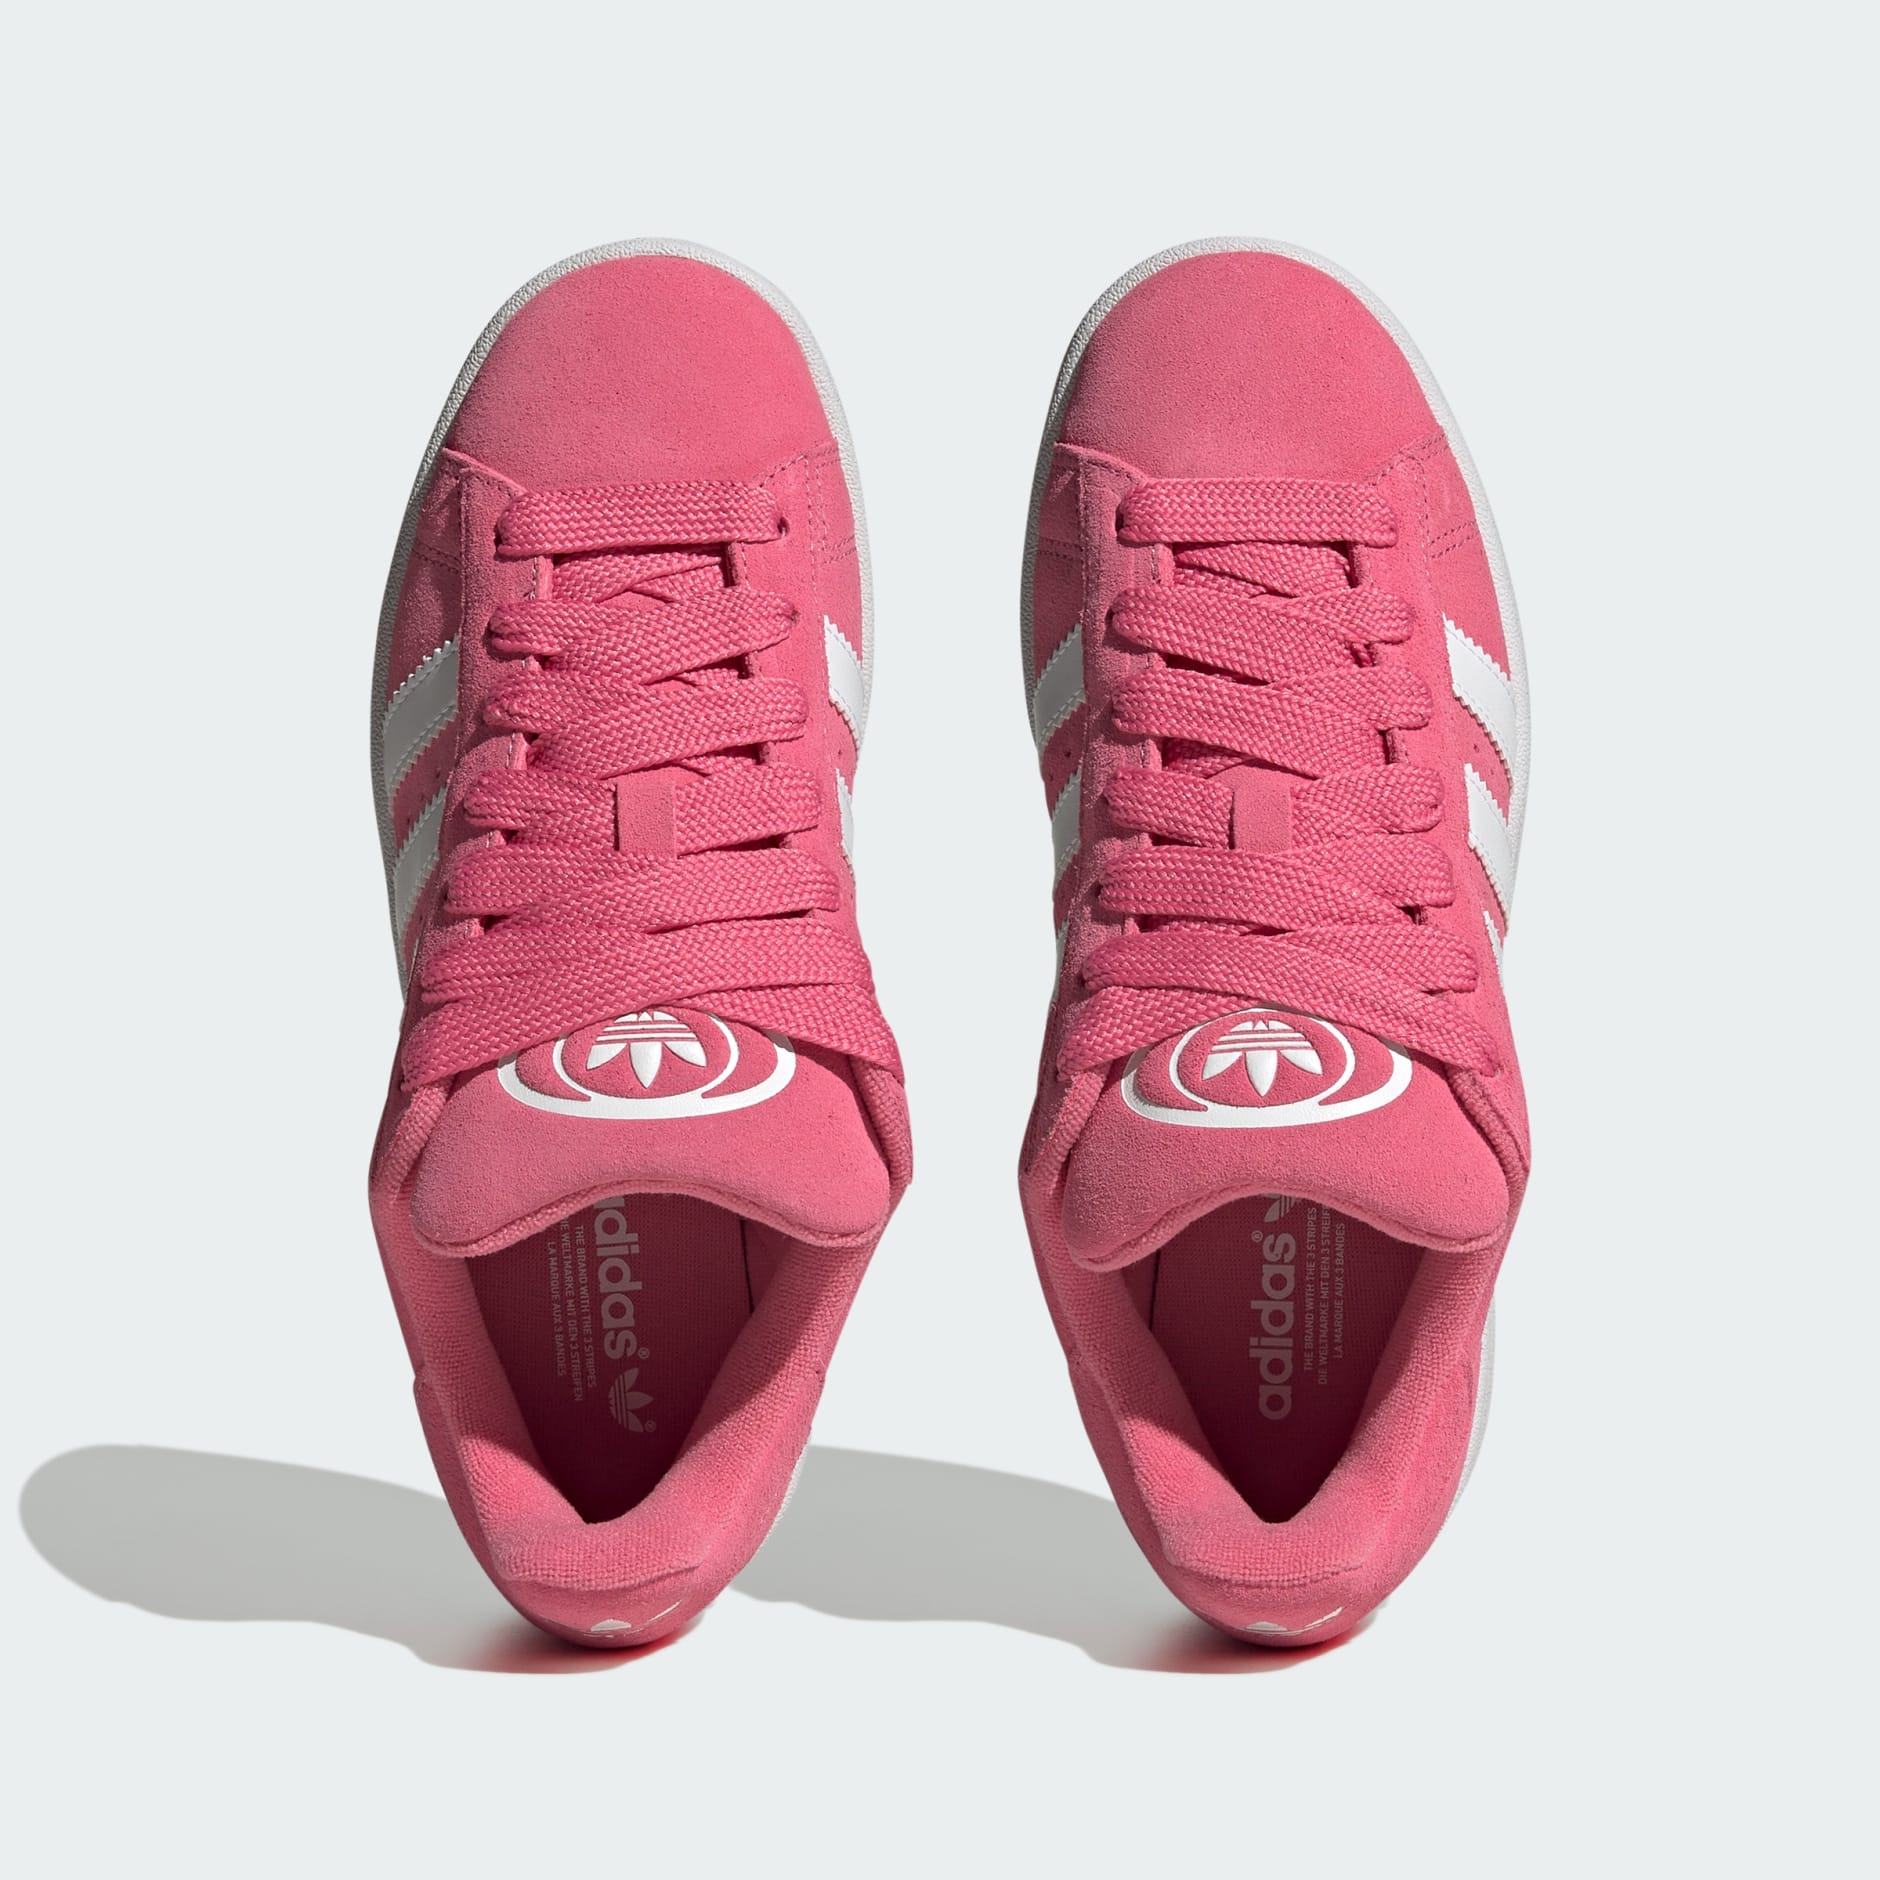 Ass Hij glas Women's Shoes - Campus 00s Shoes - Pink | adidas Oman